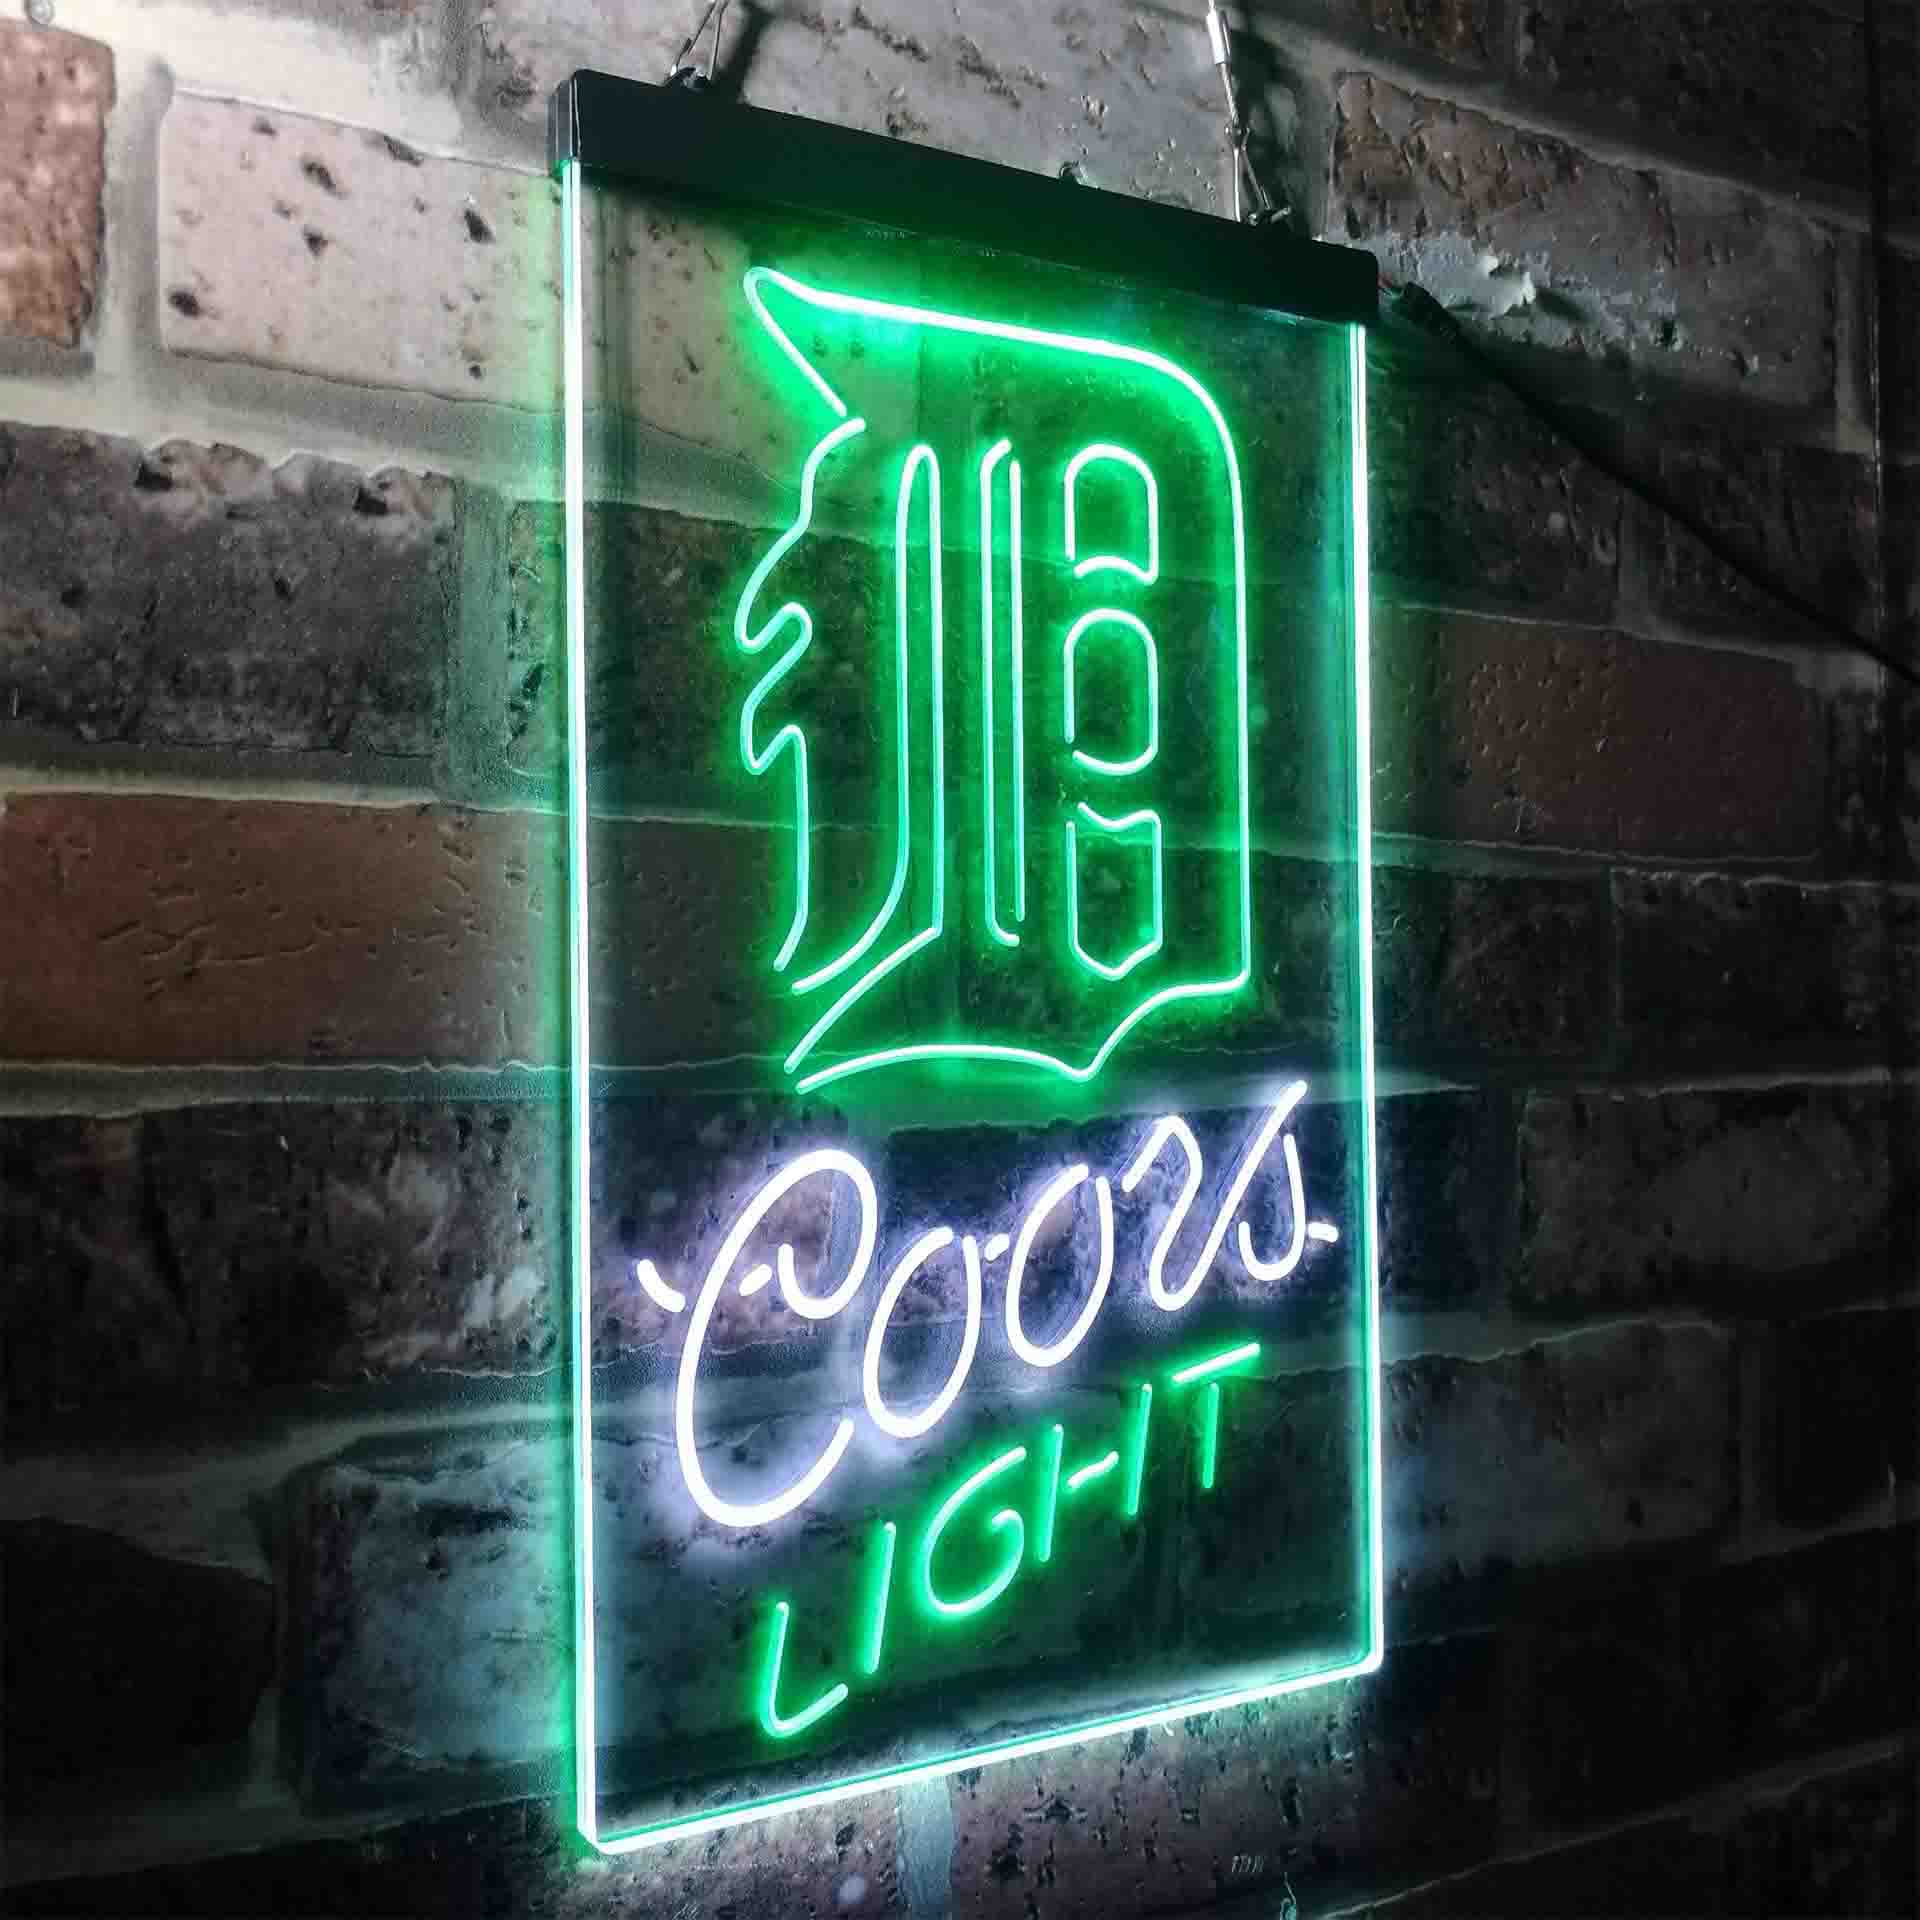 Detroit Tigers Coors Light LED Neon Sign